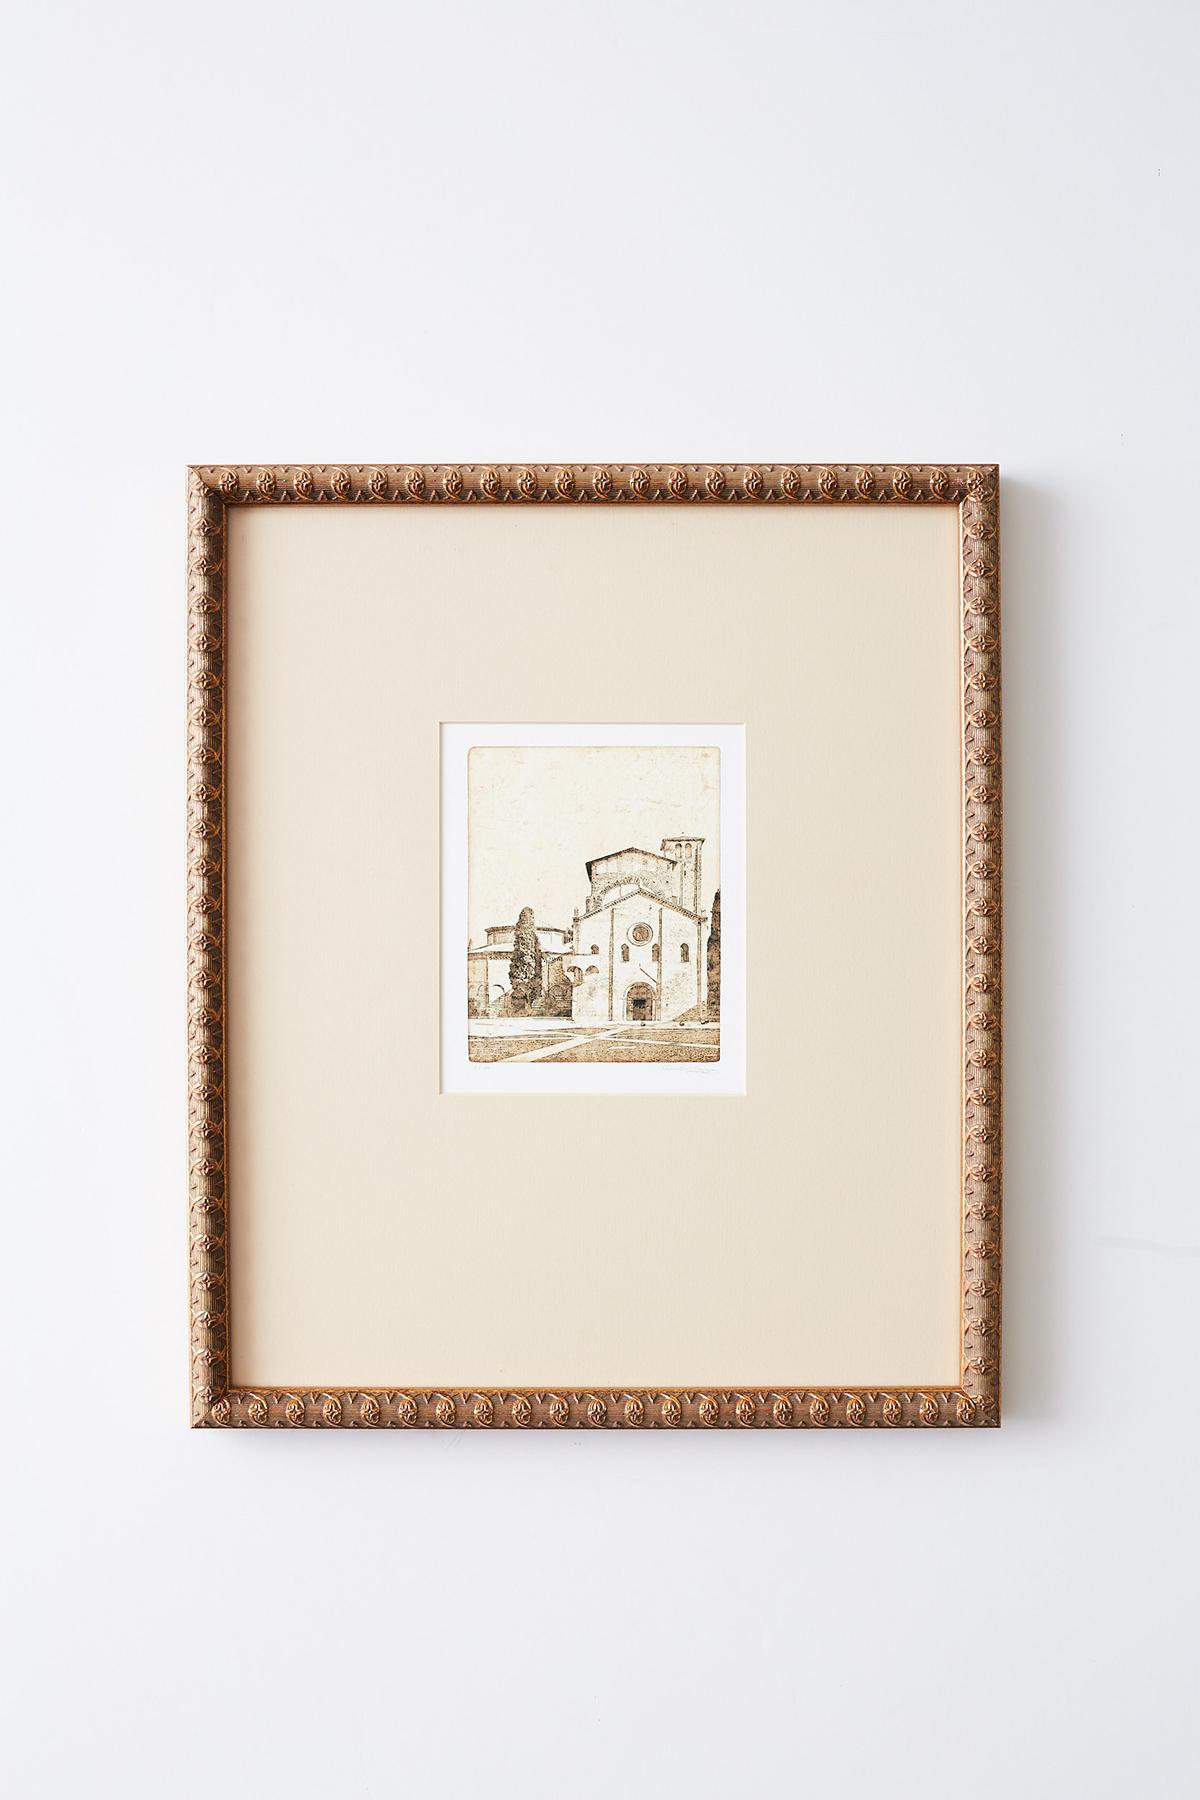 Extraordinary set of twelve architectural landscape drawings from Kenneth Gregg (American b. 1947) series of etchings. Each signed and numbered by Gregg with runs of 100 prints taken from his intimate art miniatures collection. Etchings include